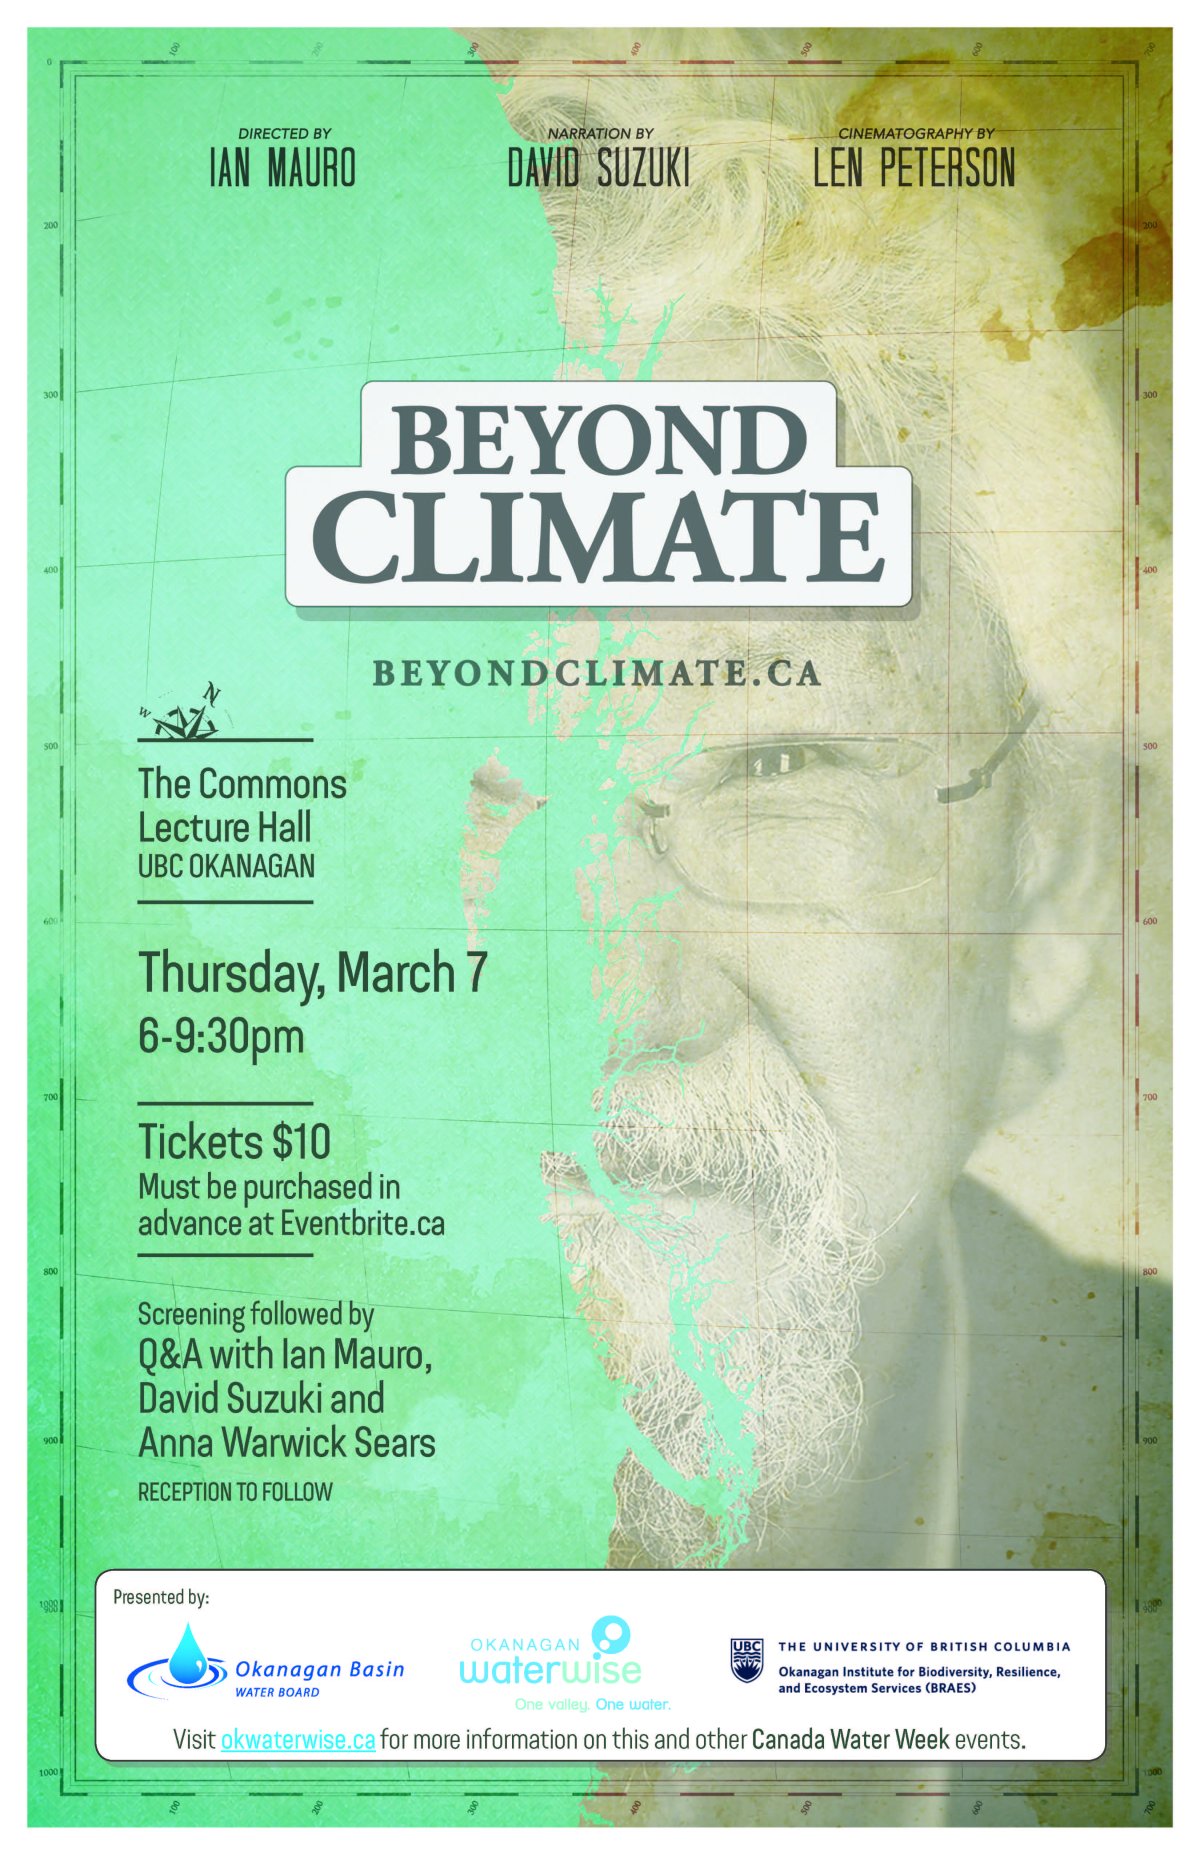 Beyond Climate Film Screening and Q & A - image